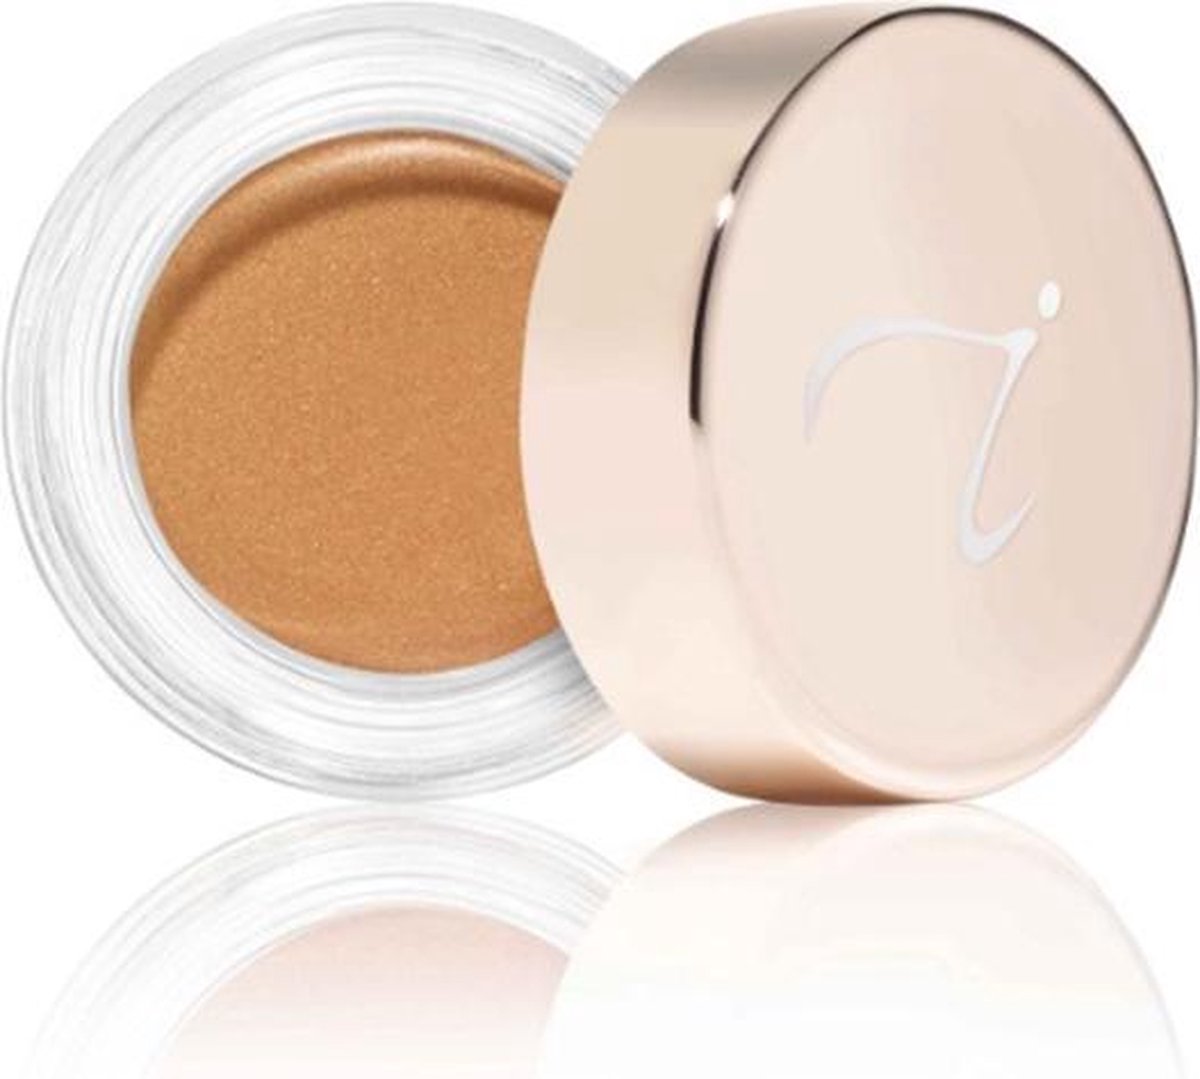 Jane Iredale Smooth Affair For Eyes Gold